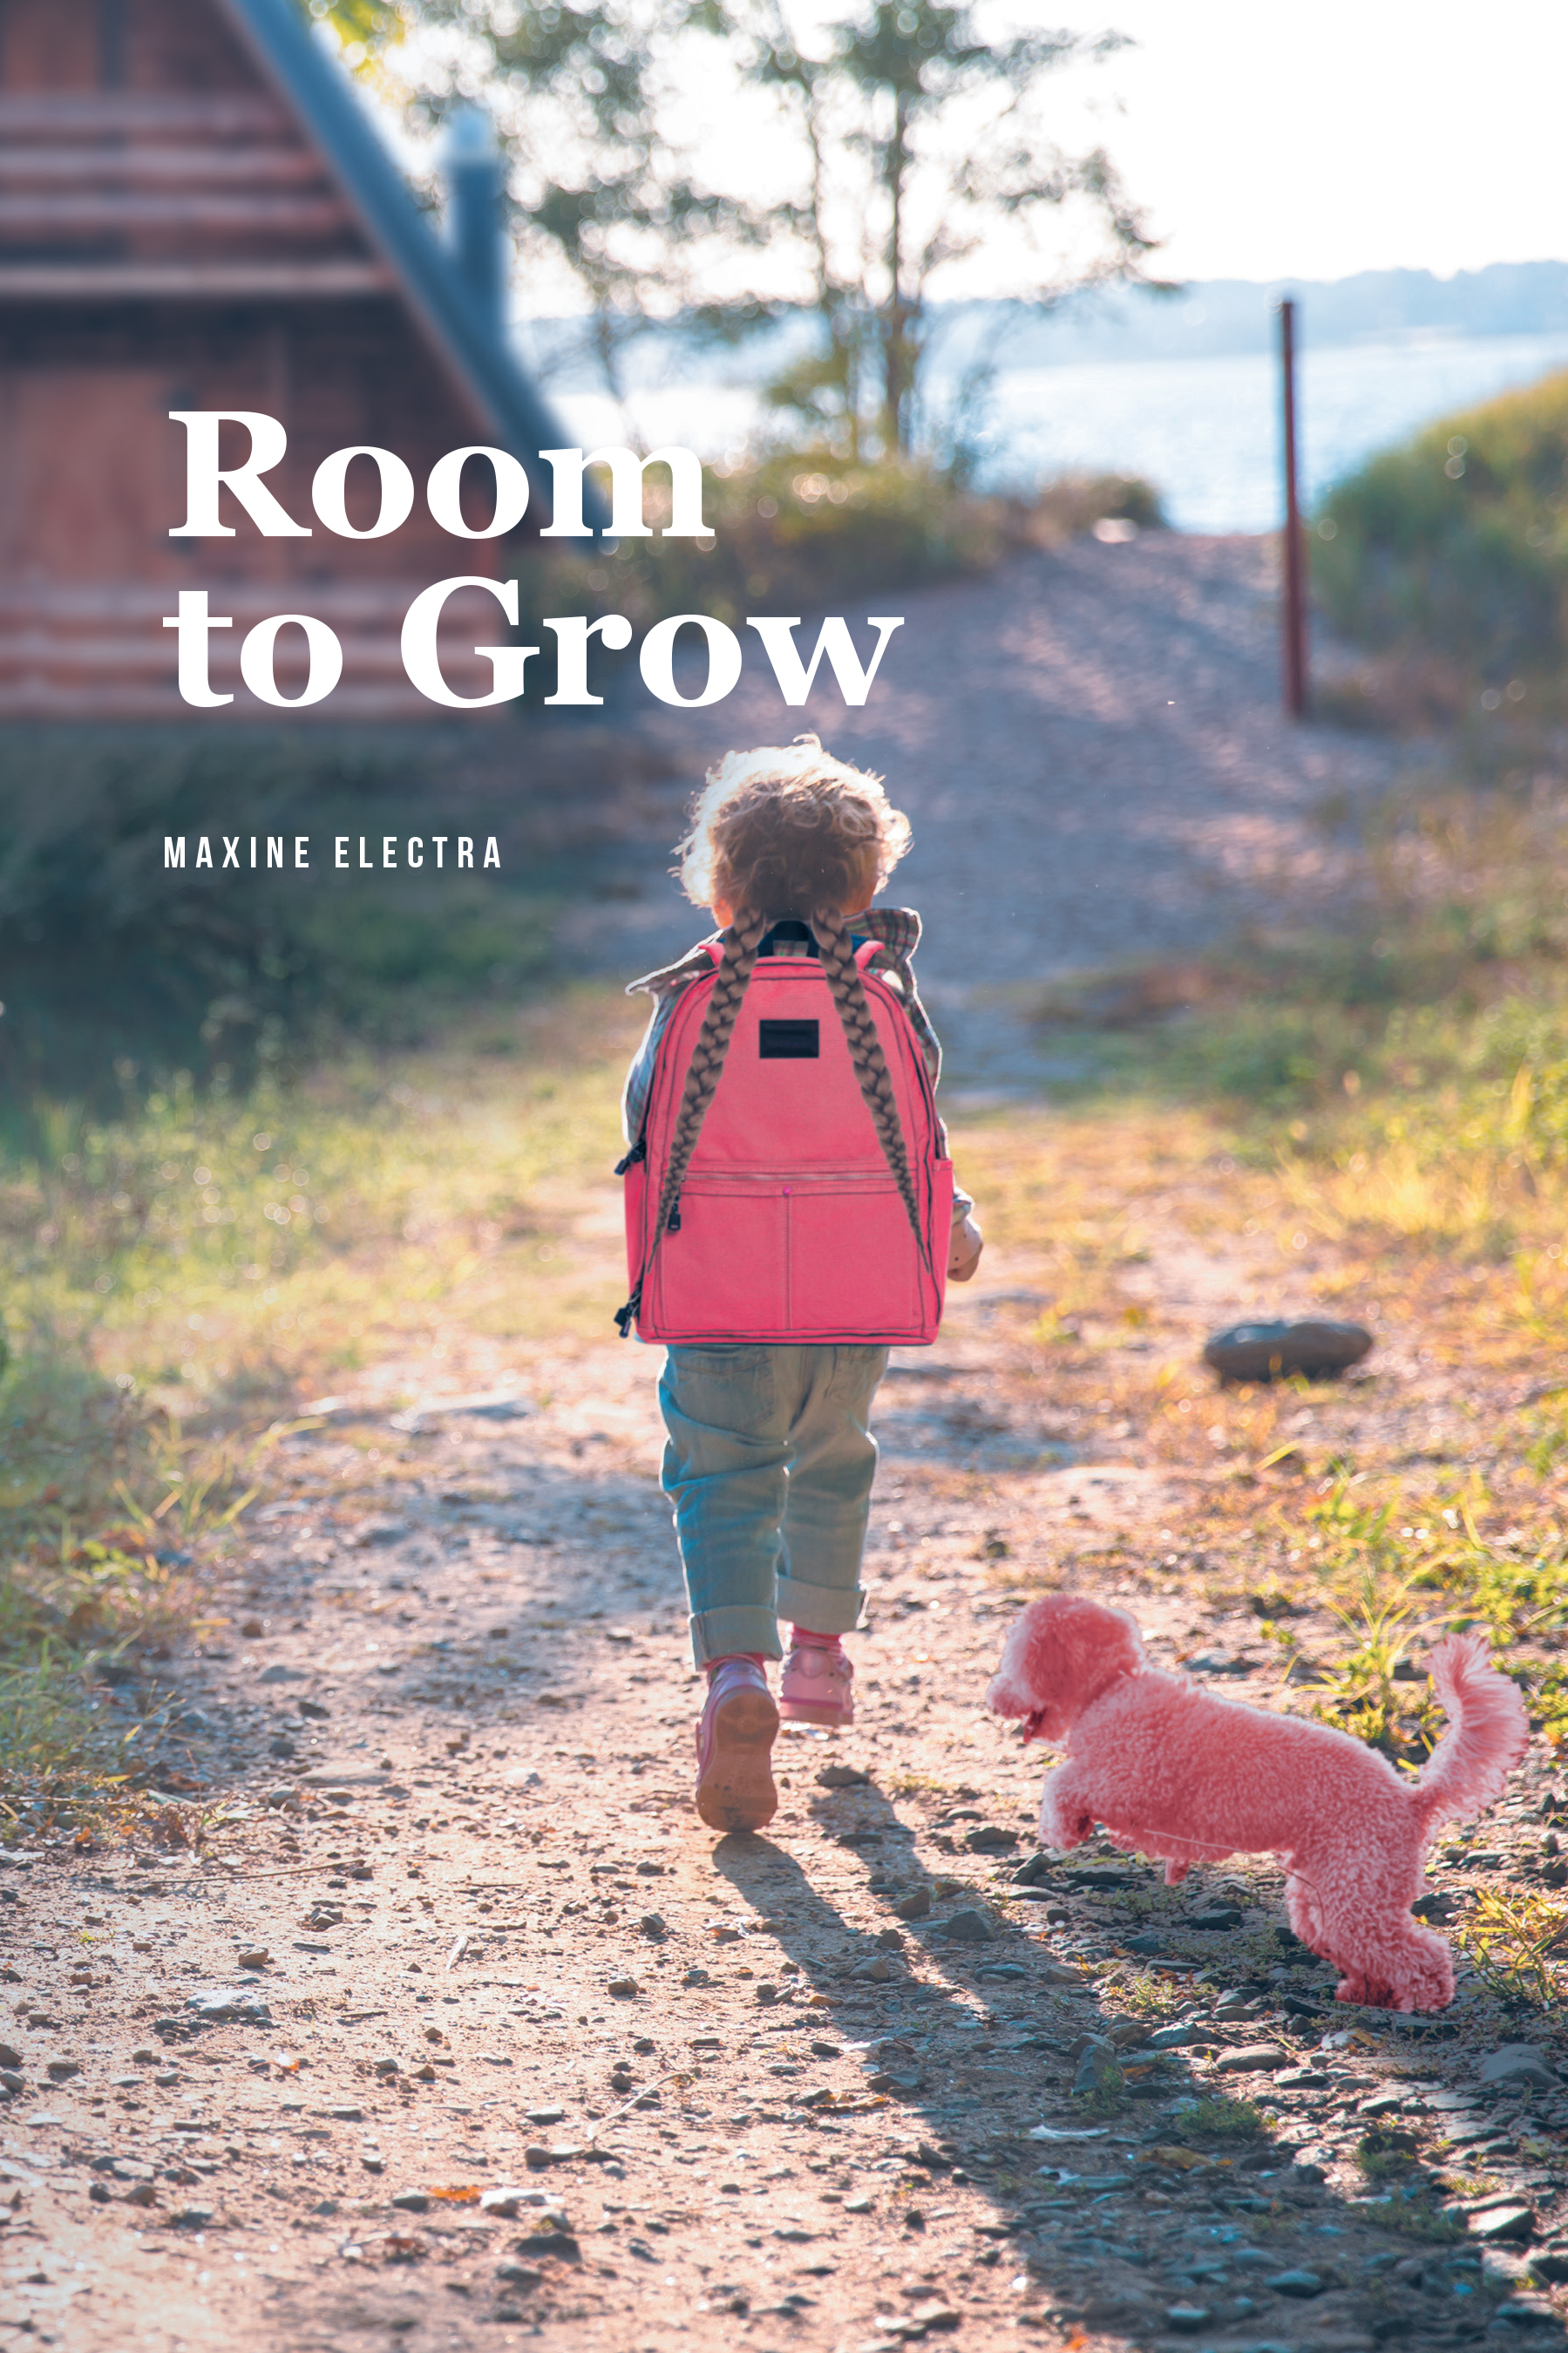 Maxine Electra’s New Book, "Room to Grow," Follows a Young Girl Whose Horrible Day Gets Even Worse After She’s Chased Into the Woods and Can’t Find Her Way Back